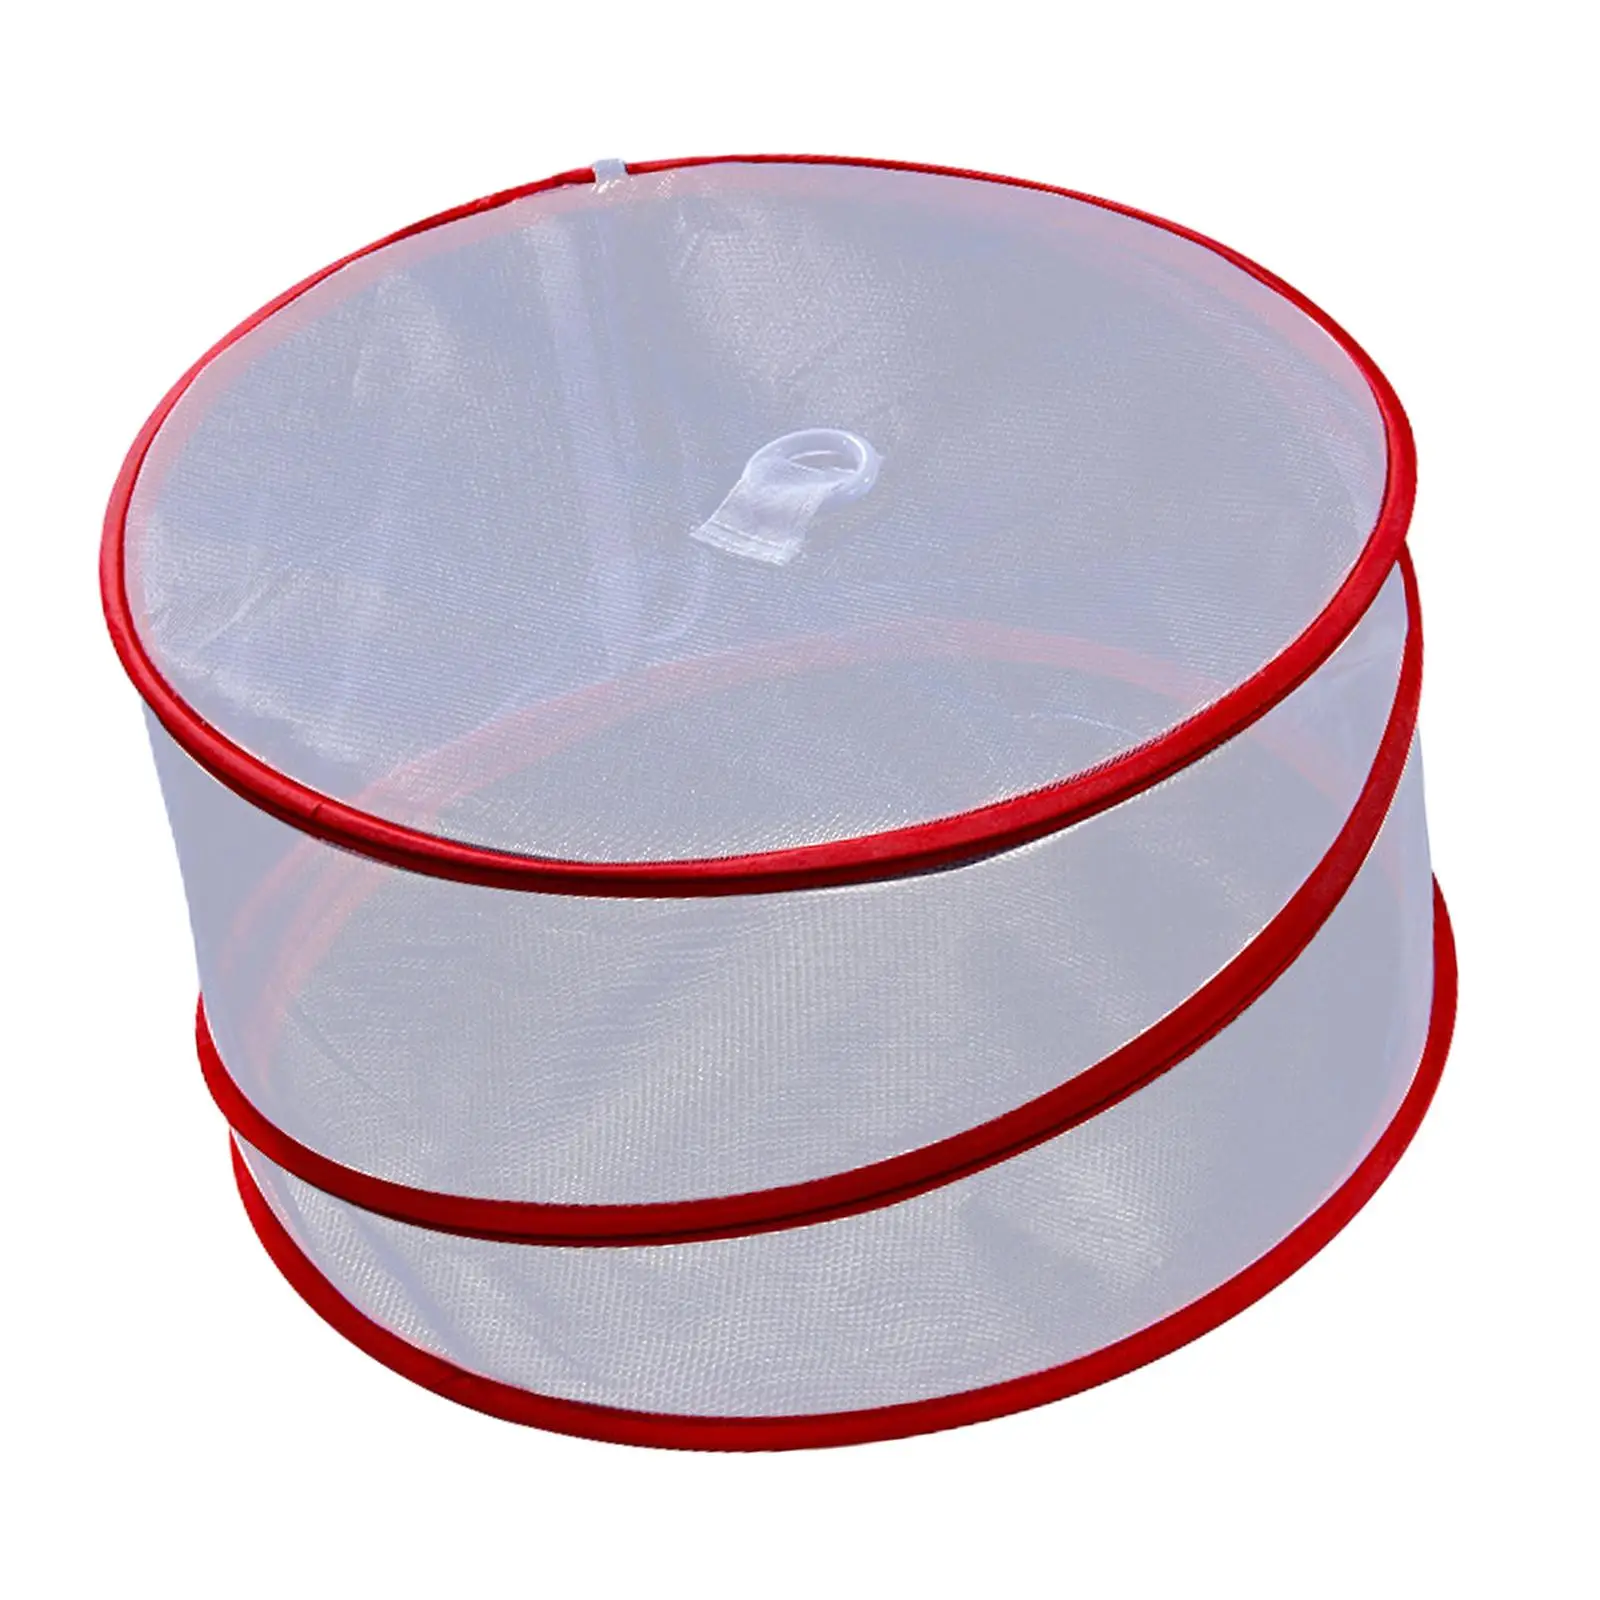 Food Cover Fruit Vegetable Cover Round Food Tents Keeps Fly Away Plate Serving Covers for BBQ Parties Cooking Hiking Trays